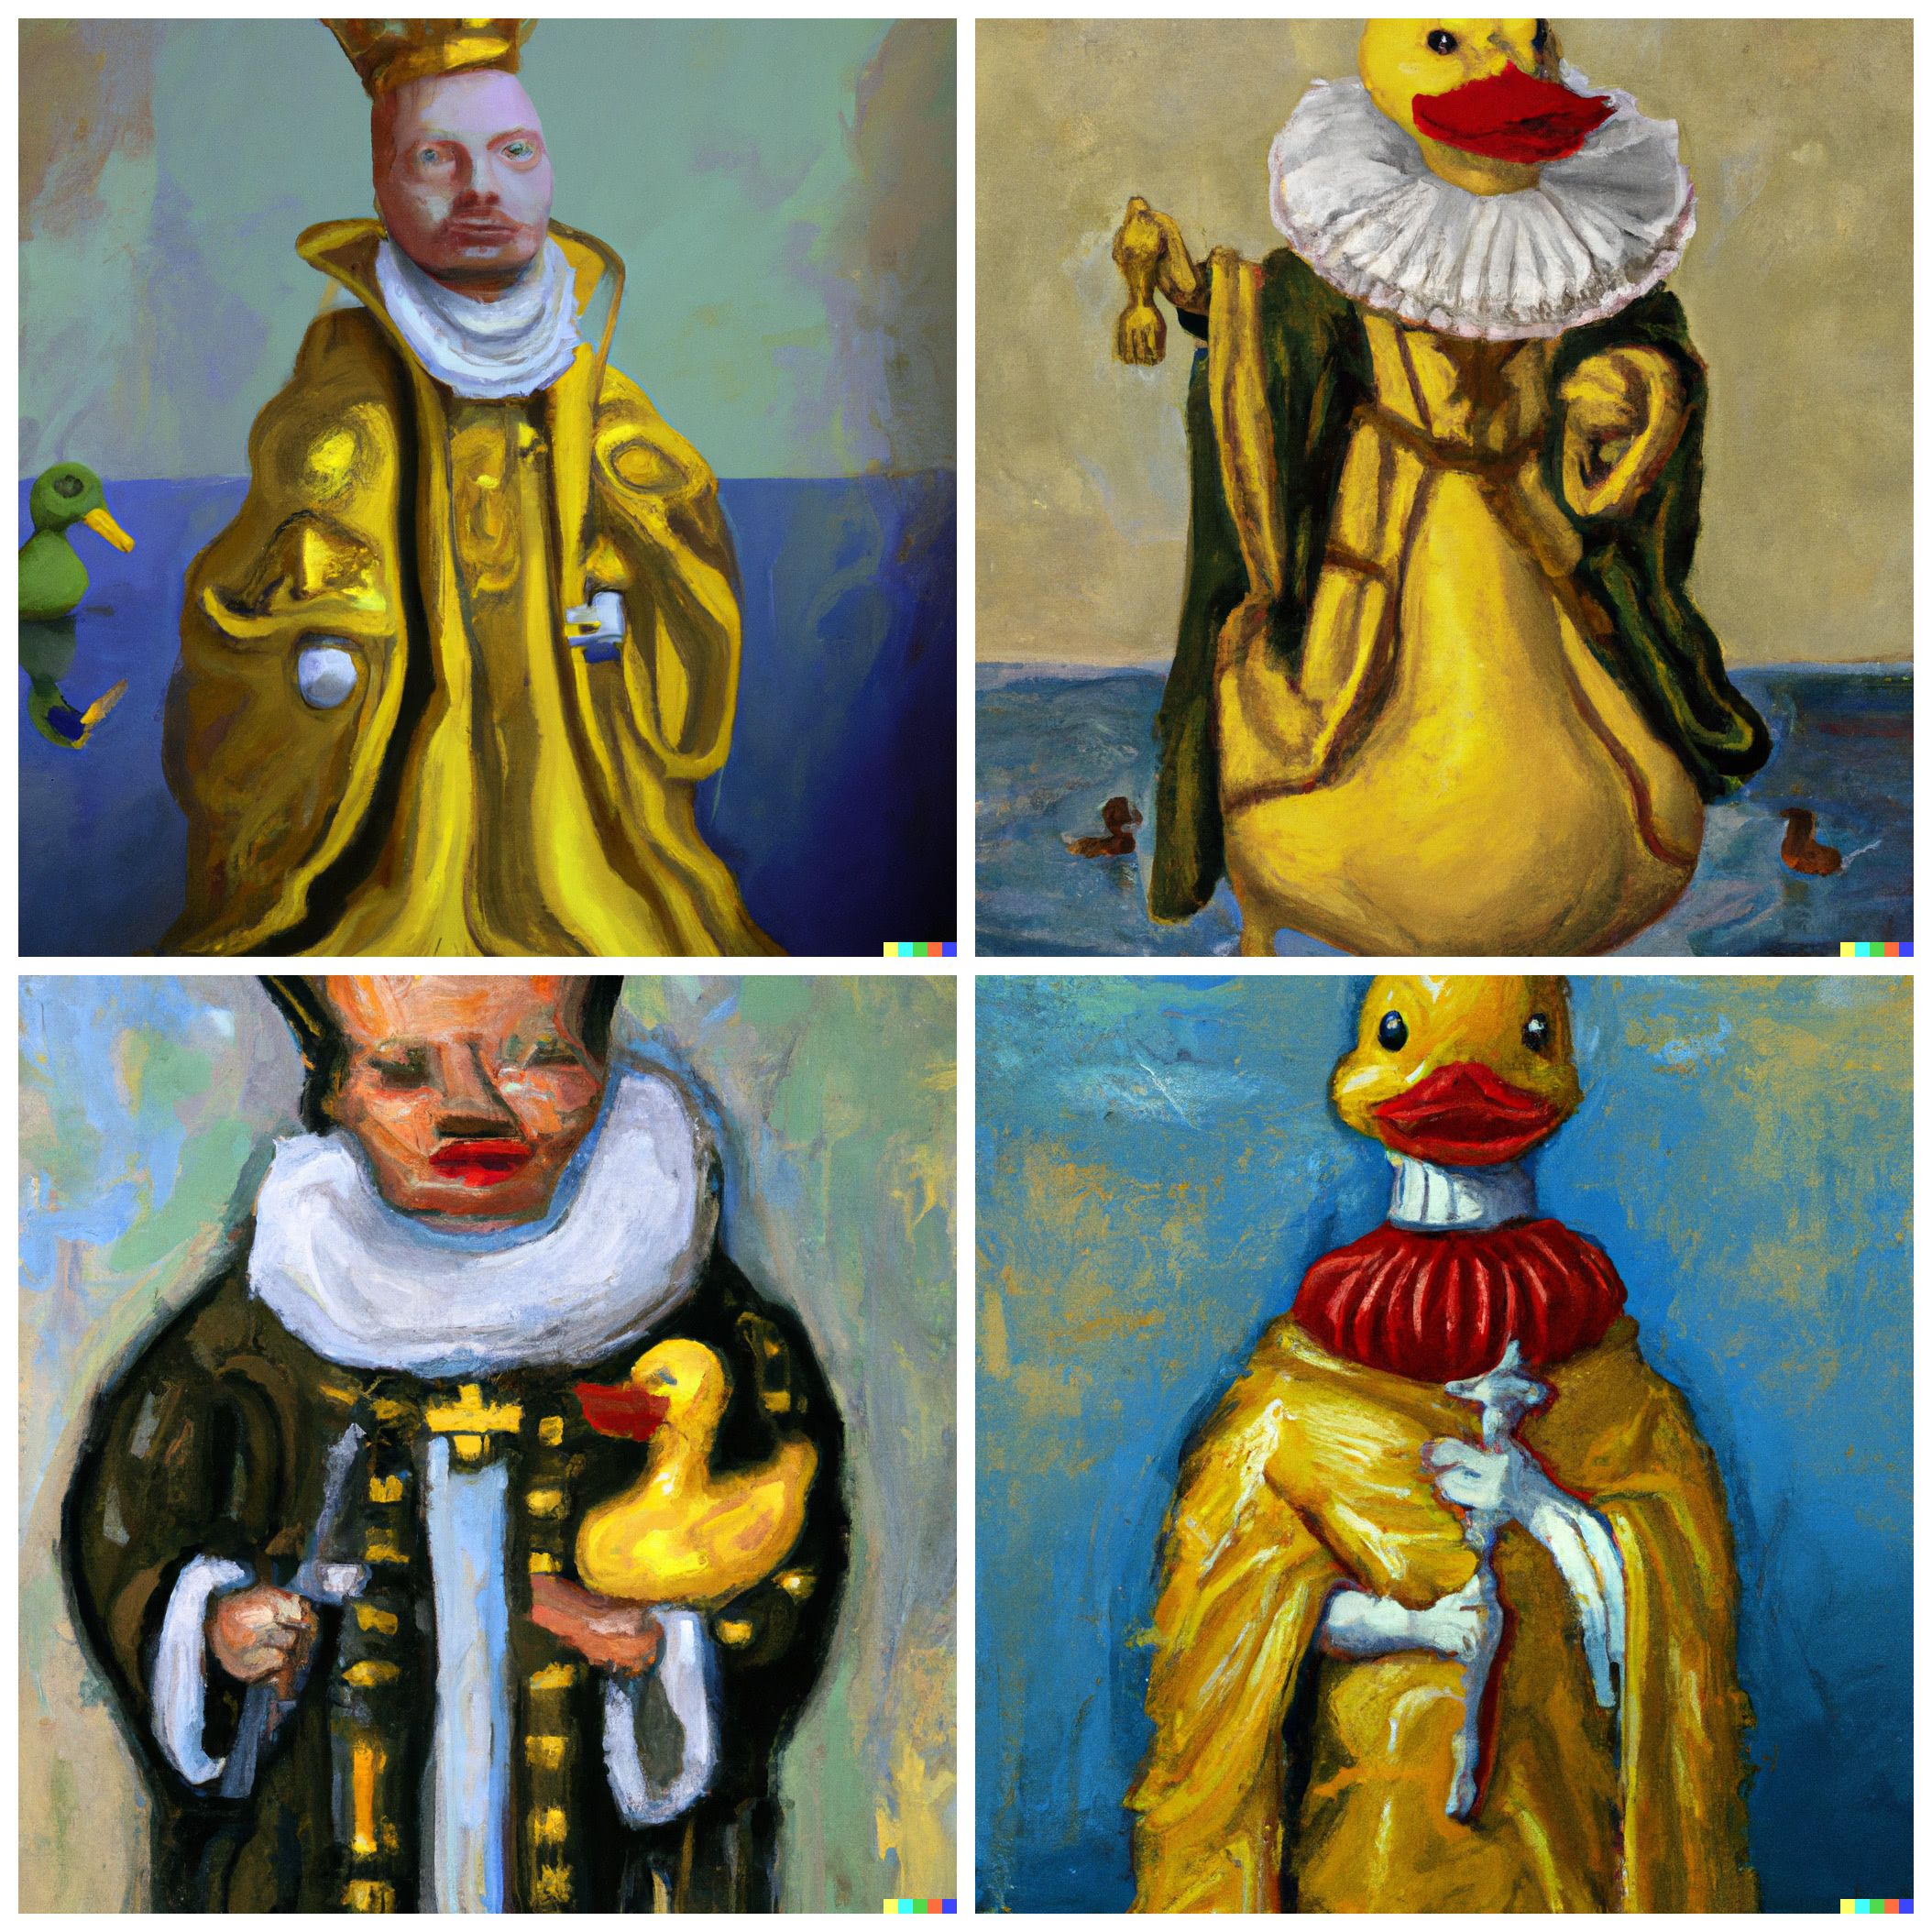 An oil painting of a rubber duck wearing medieval robe by Dali